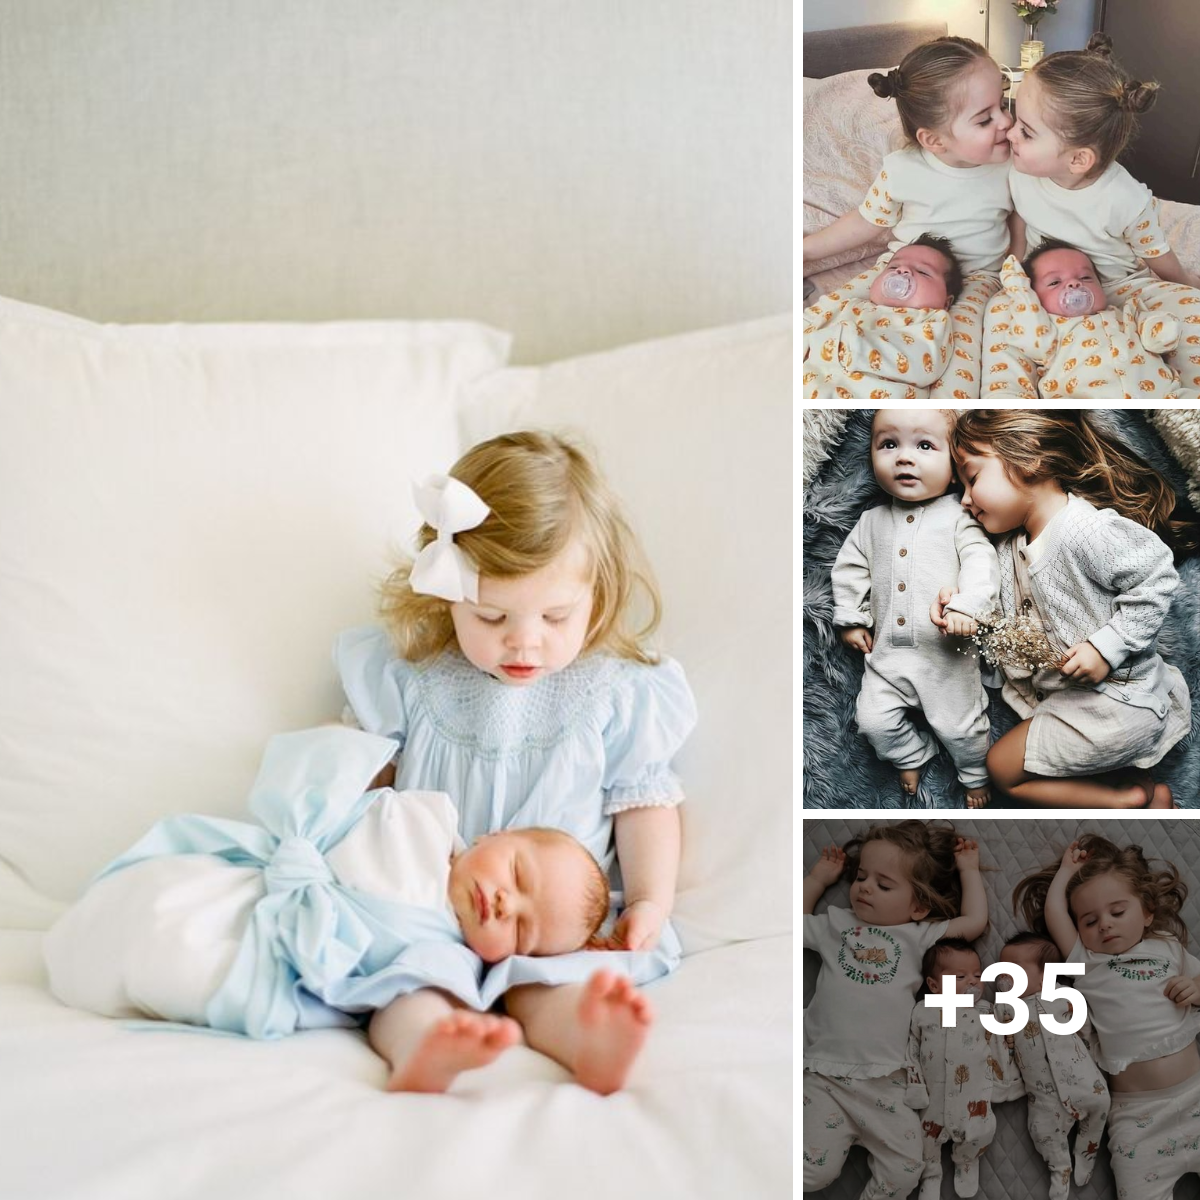 The enduring tie of sisterly love is demonstrated by the more than fifty incredibly cute acts and care gestures from an older sister to her younger brother.